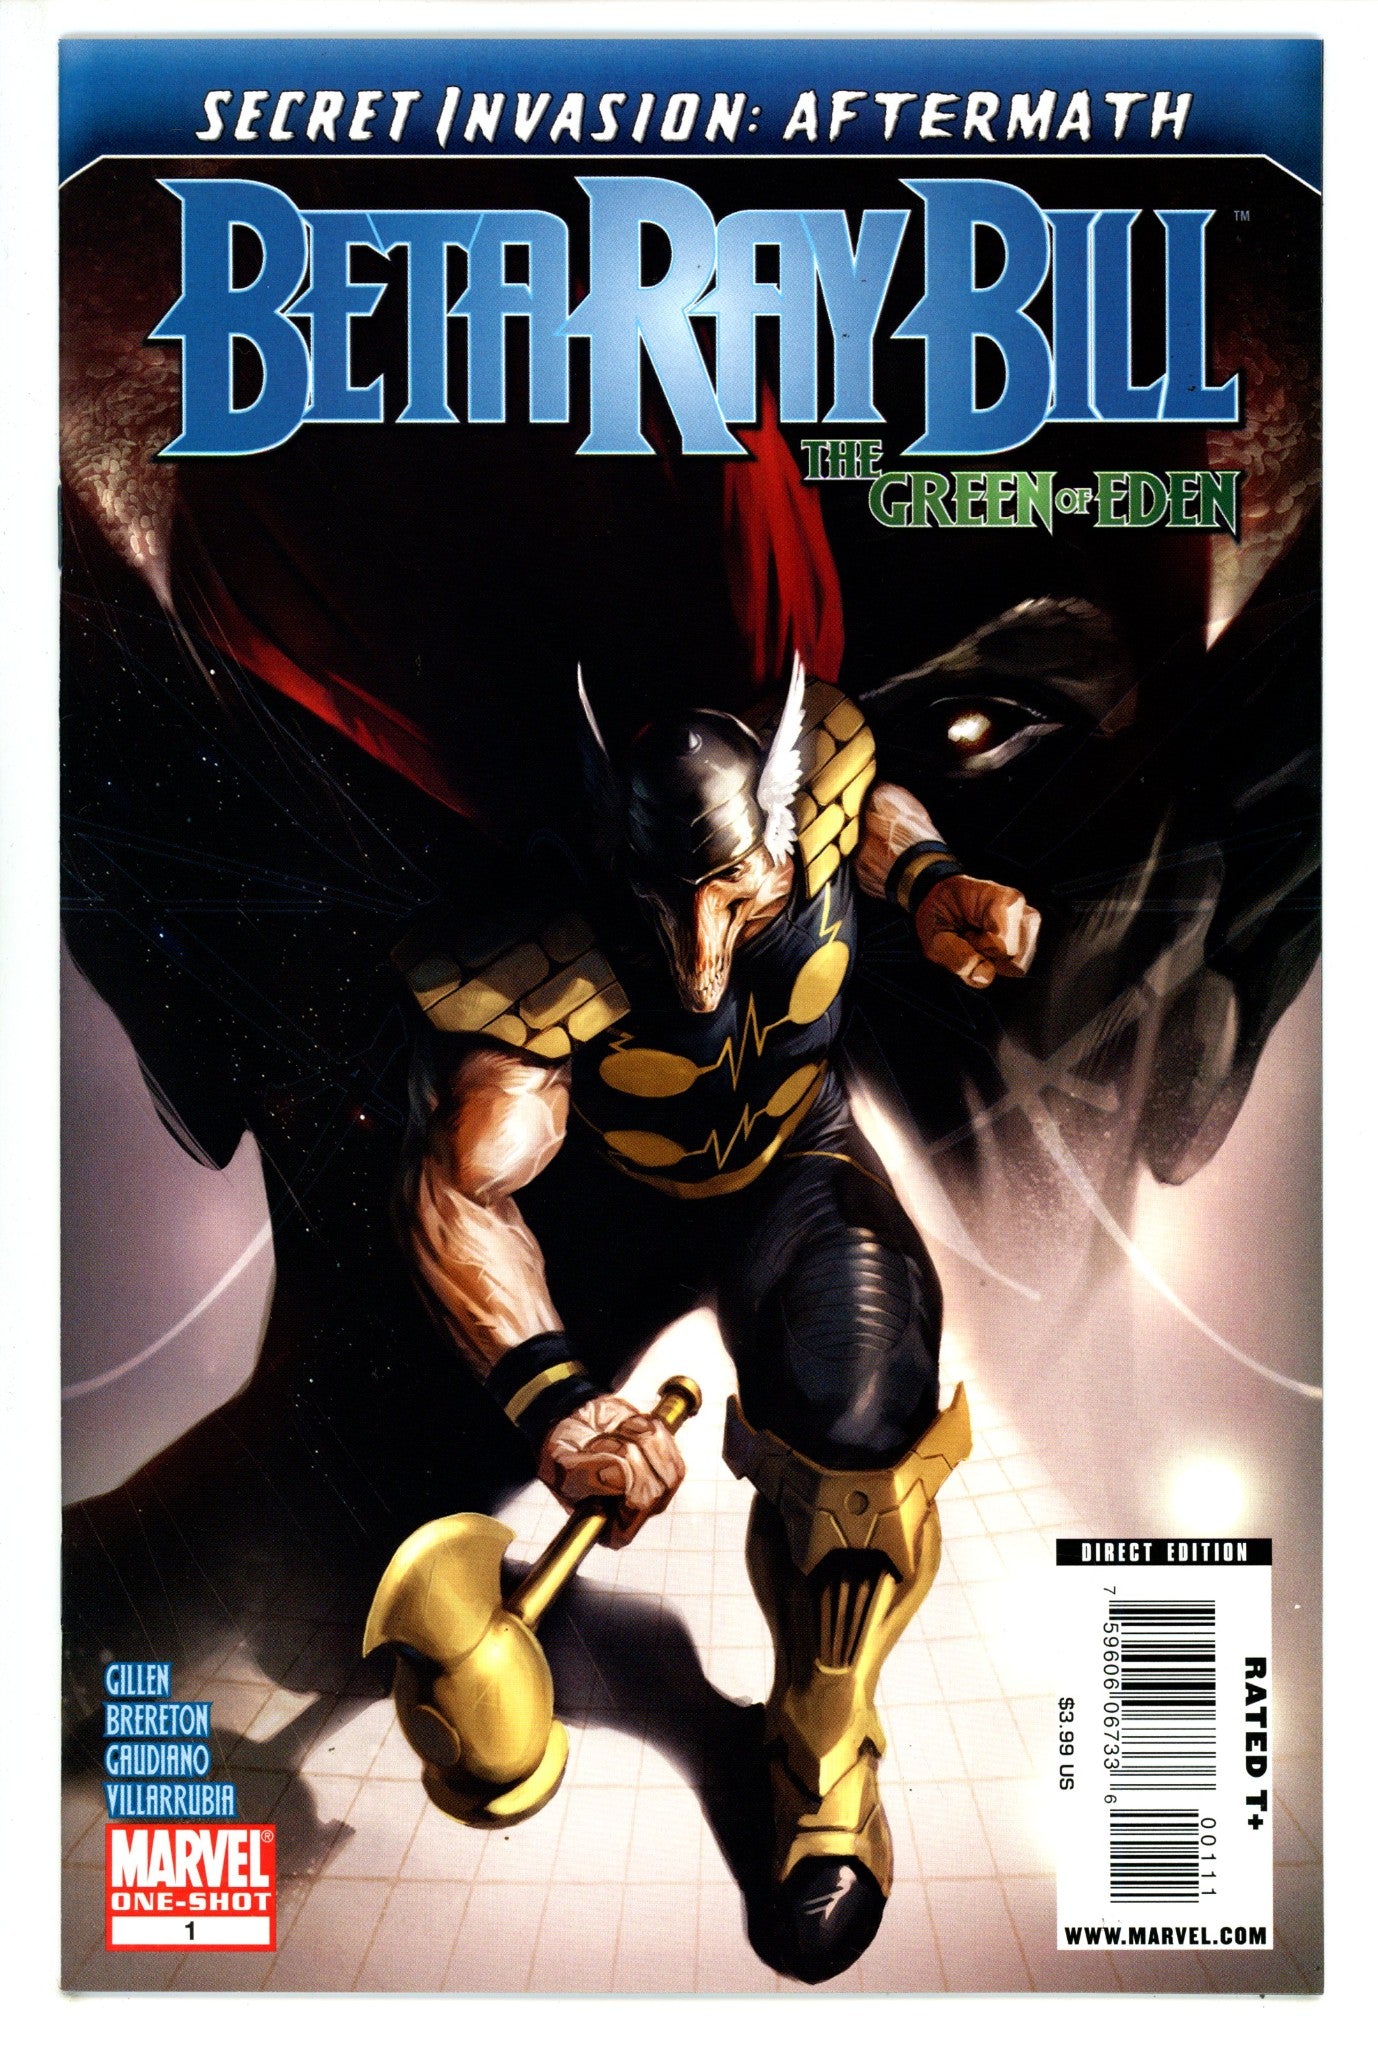 Secret Invasion Aftermath: Beta Ray Bill - The Green of Eden 1 NM (9.4) (2009)